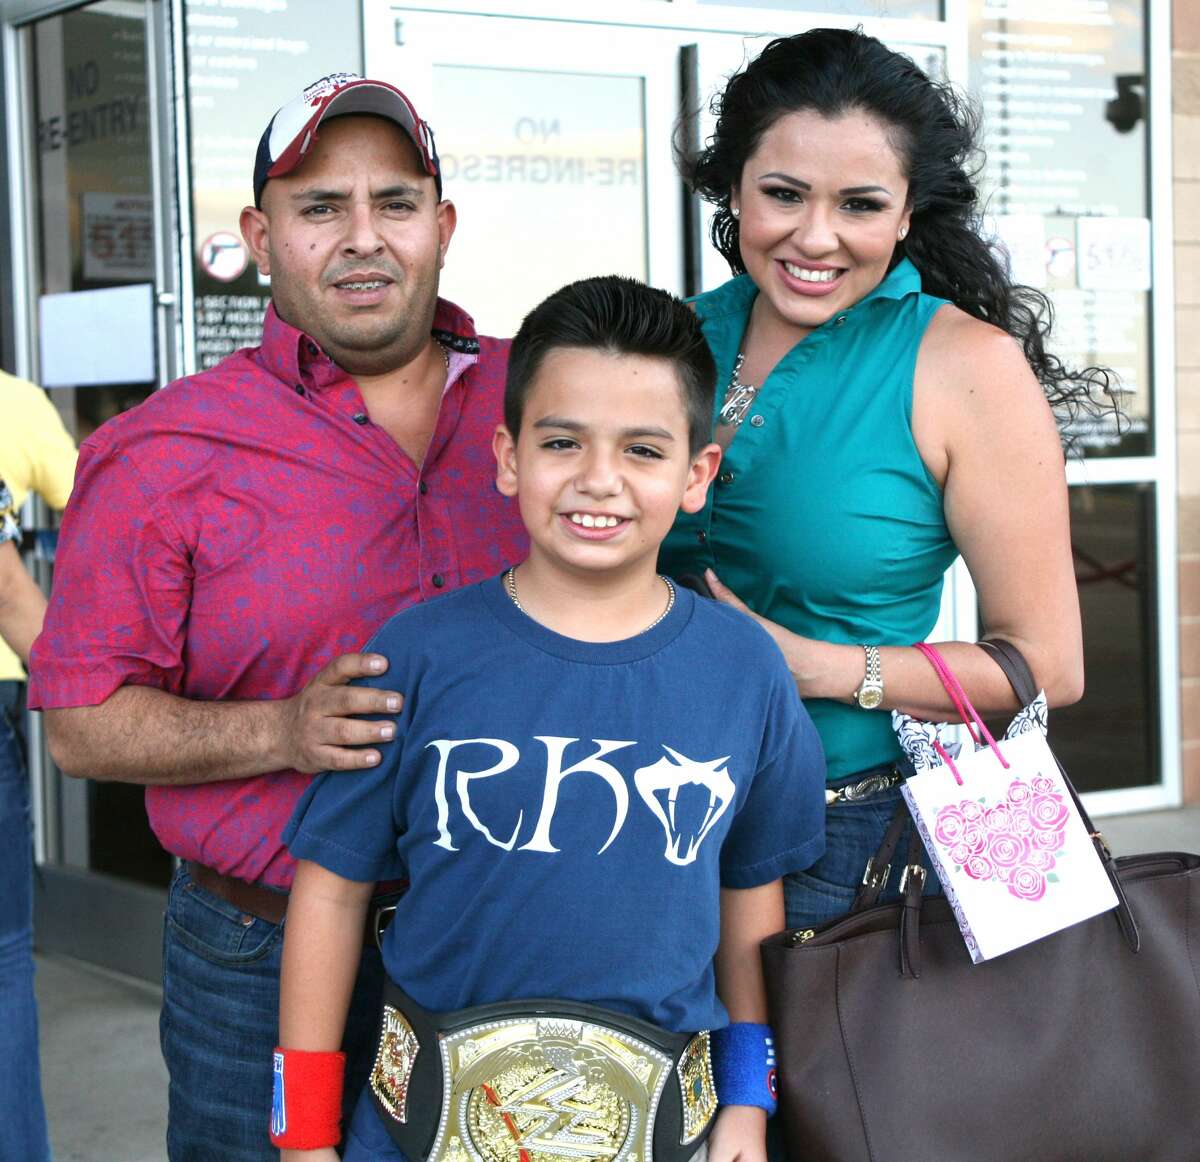 Fans and families attend WWE Live at Laredo Energy Arena on Tuesday, July 11, 2017.